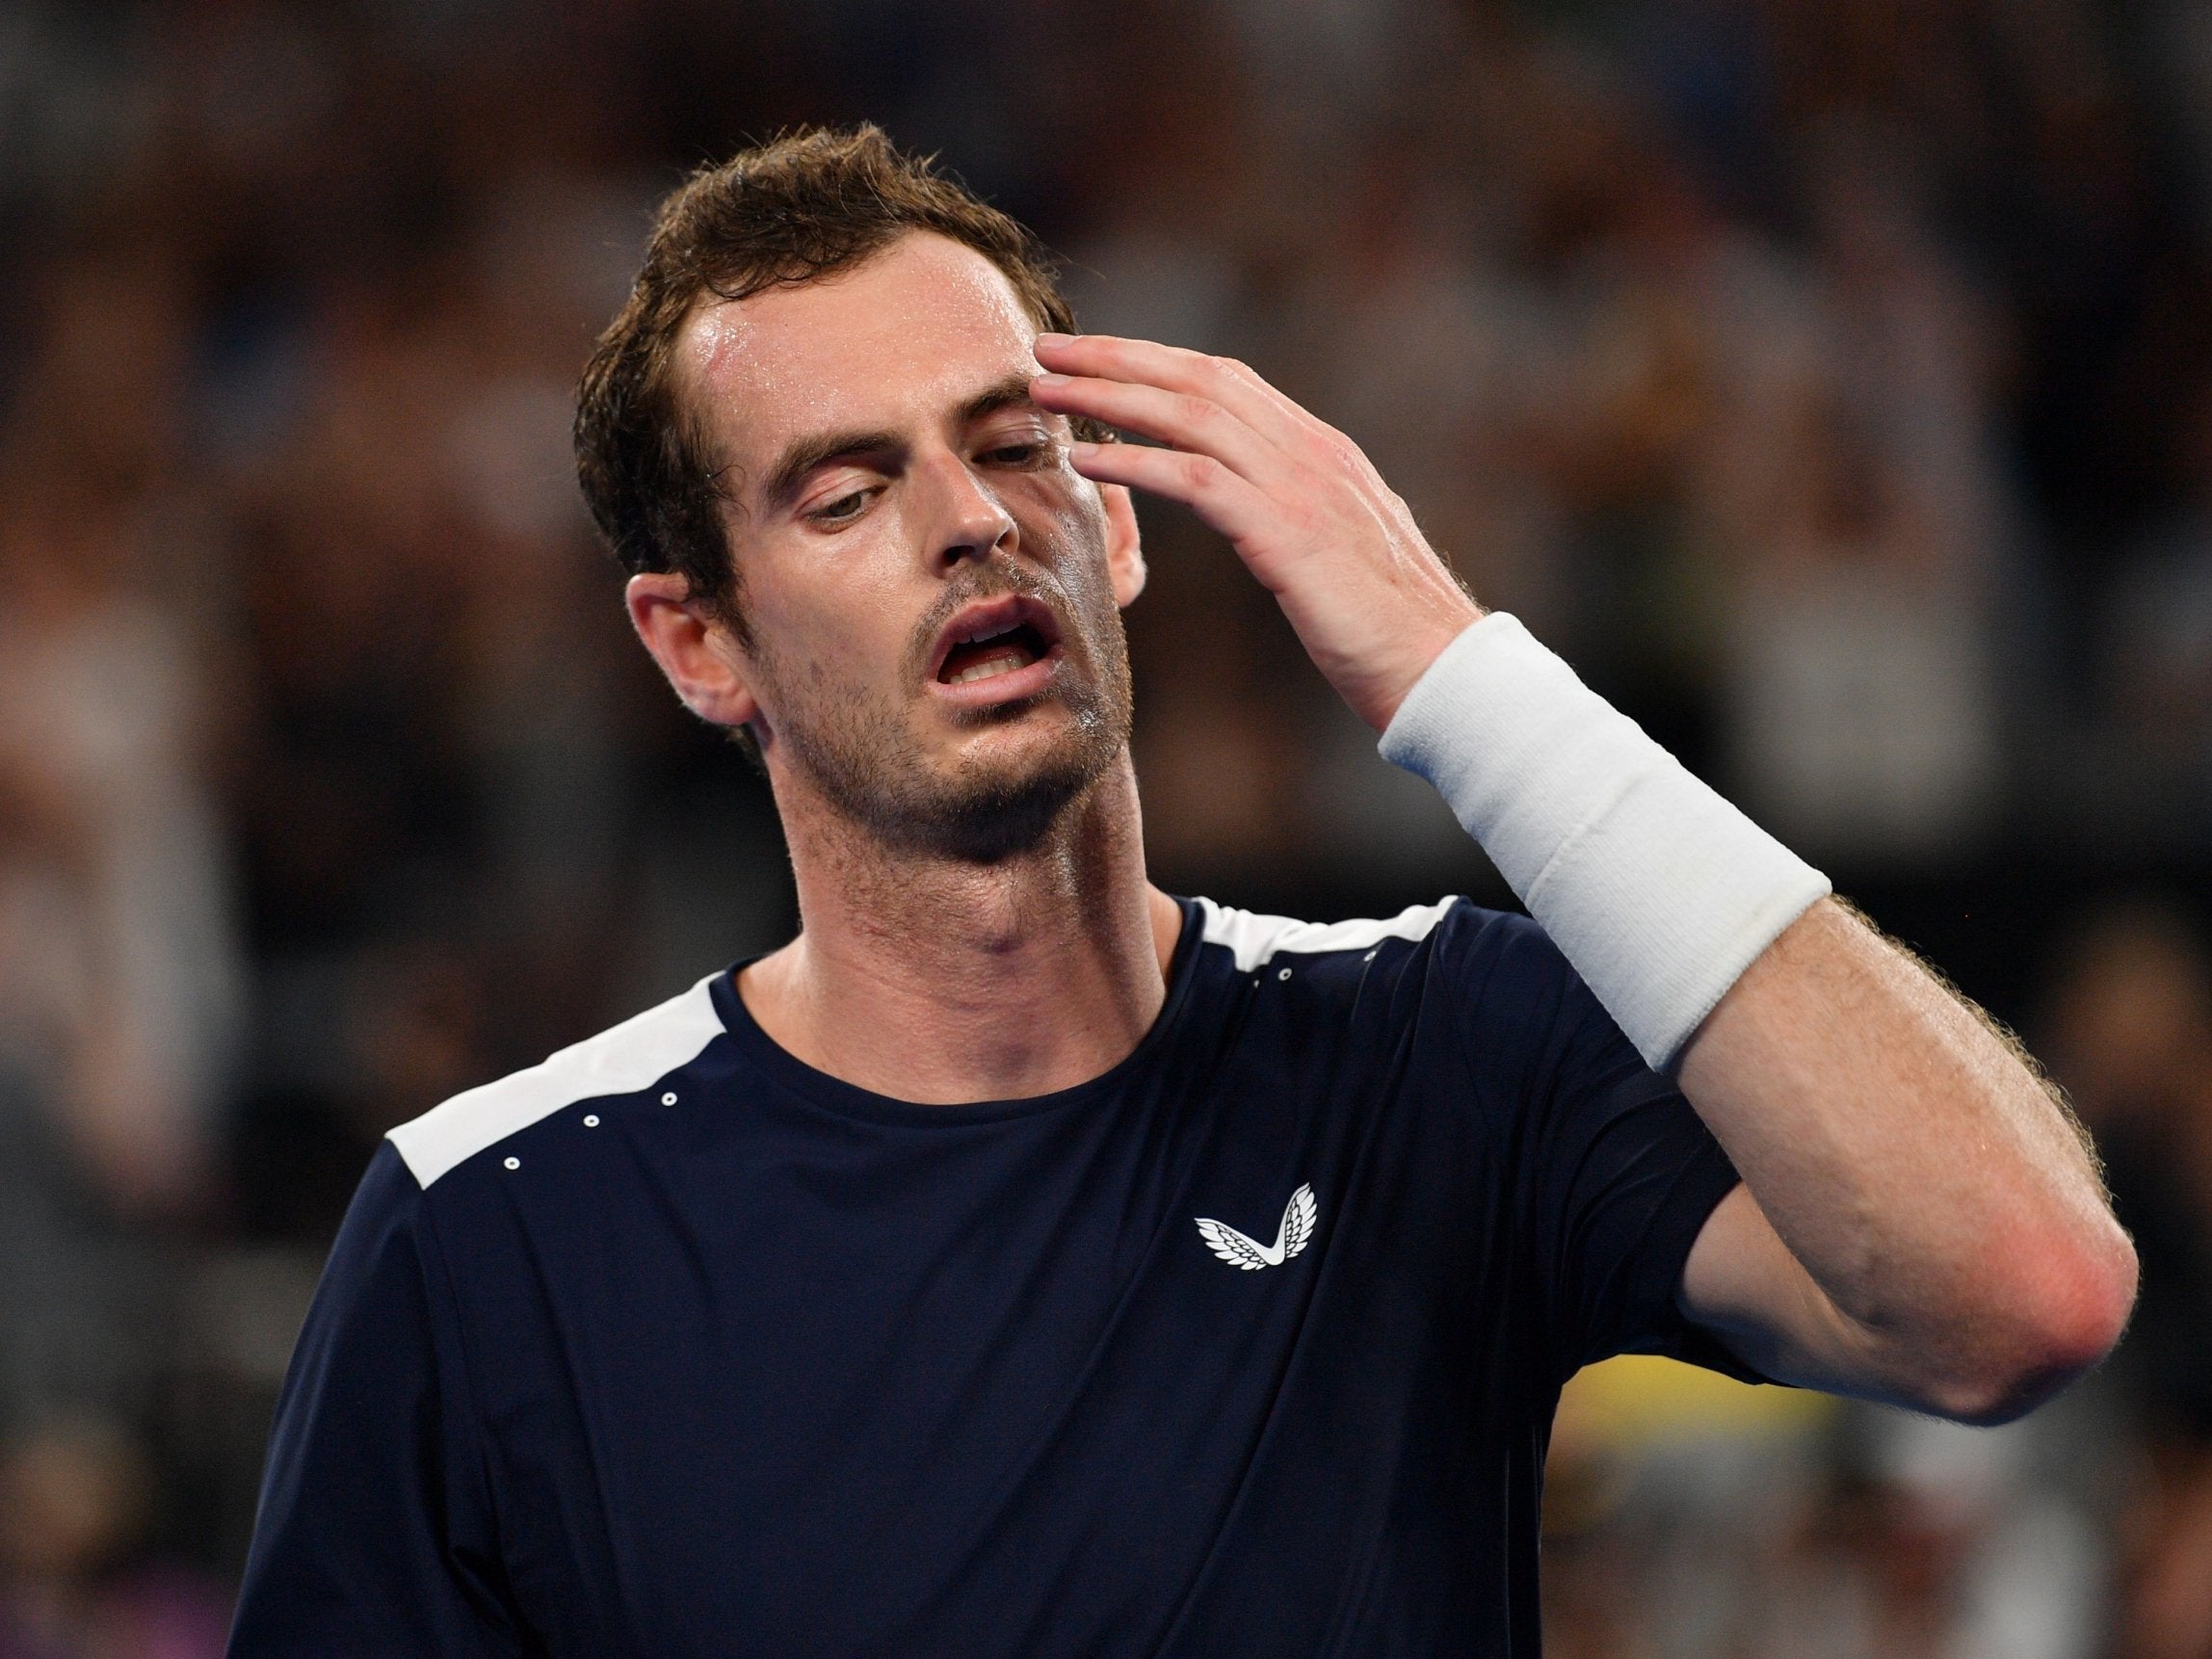 Murray suffered a five-set defeat against Roberto Bautista Agut in the first round